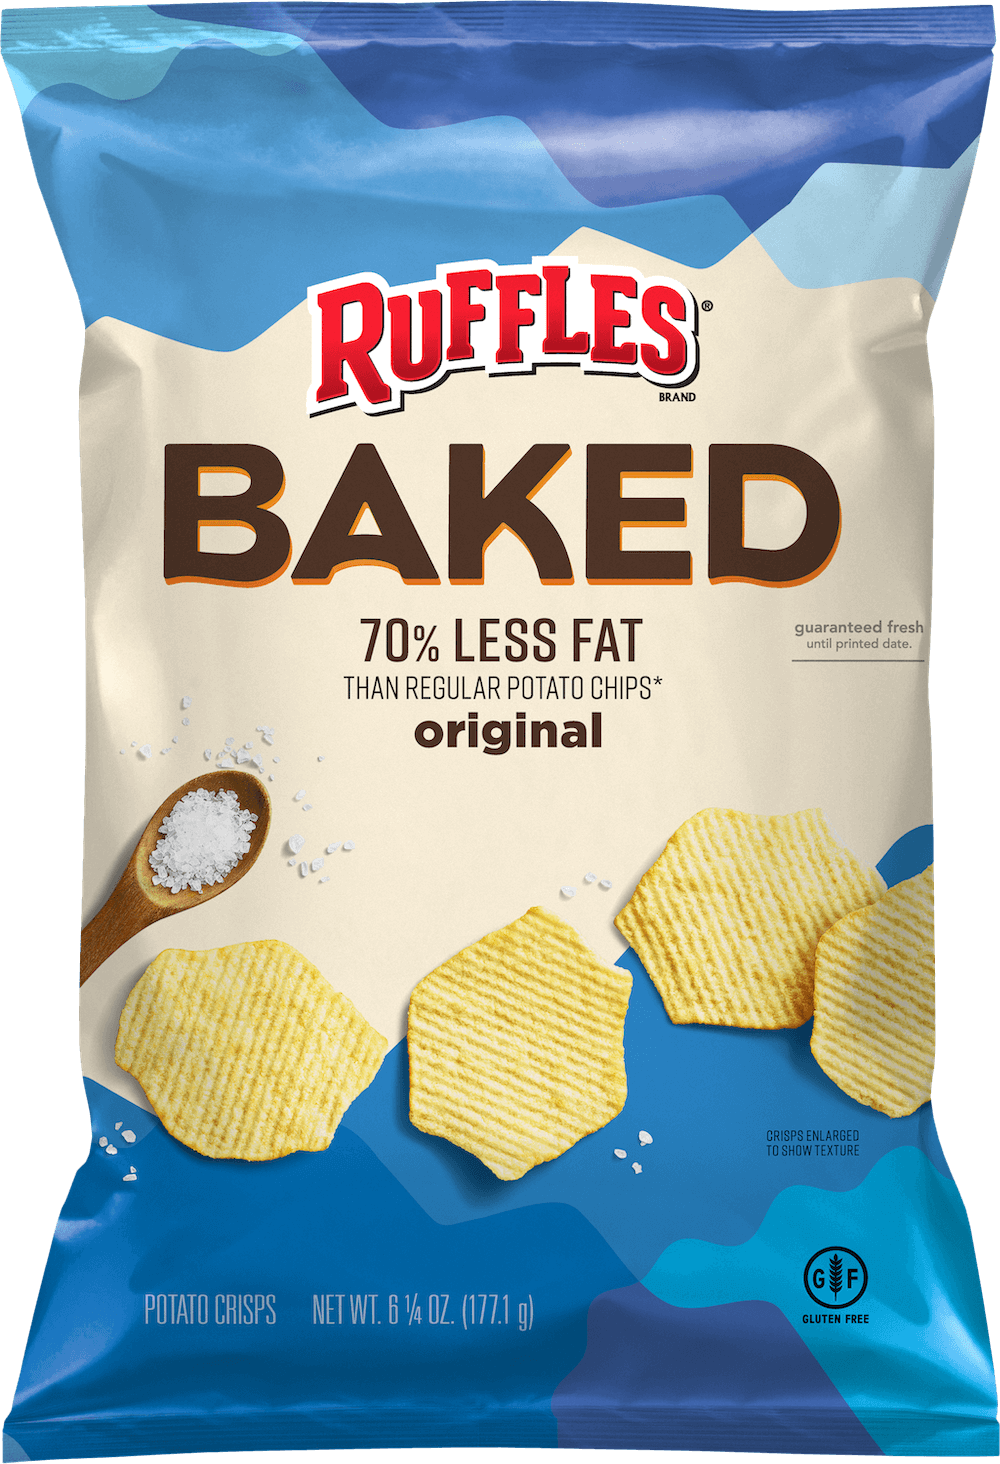 What do you love most about the No Brand Potato Chip Original